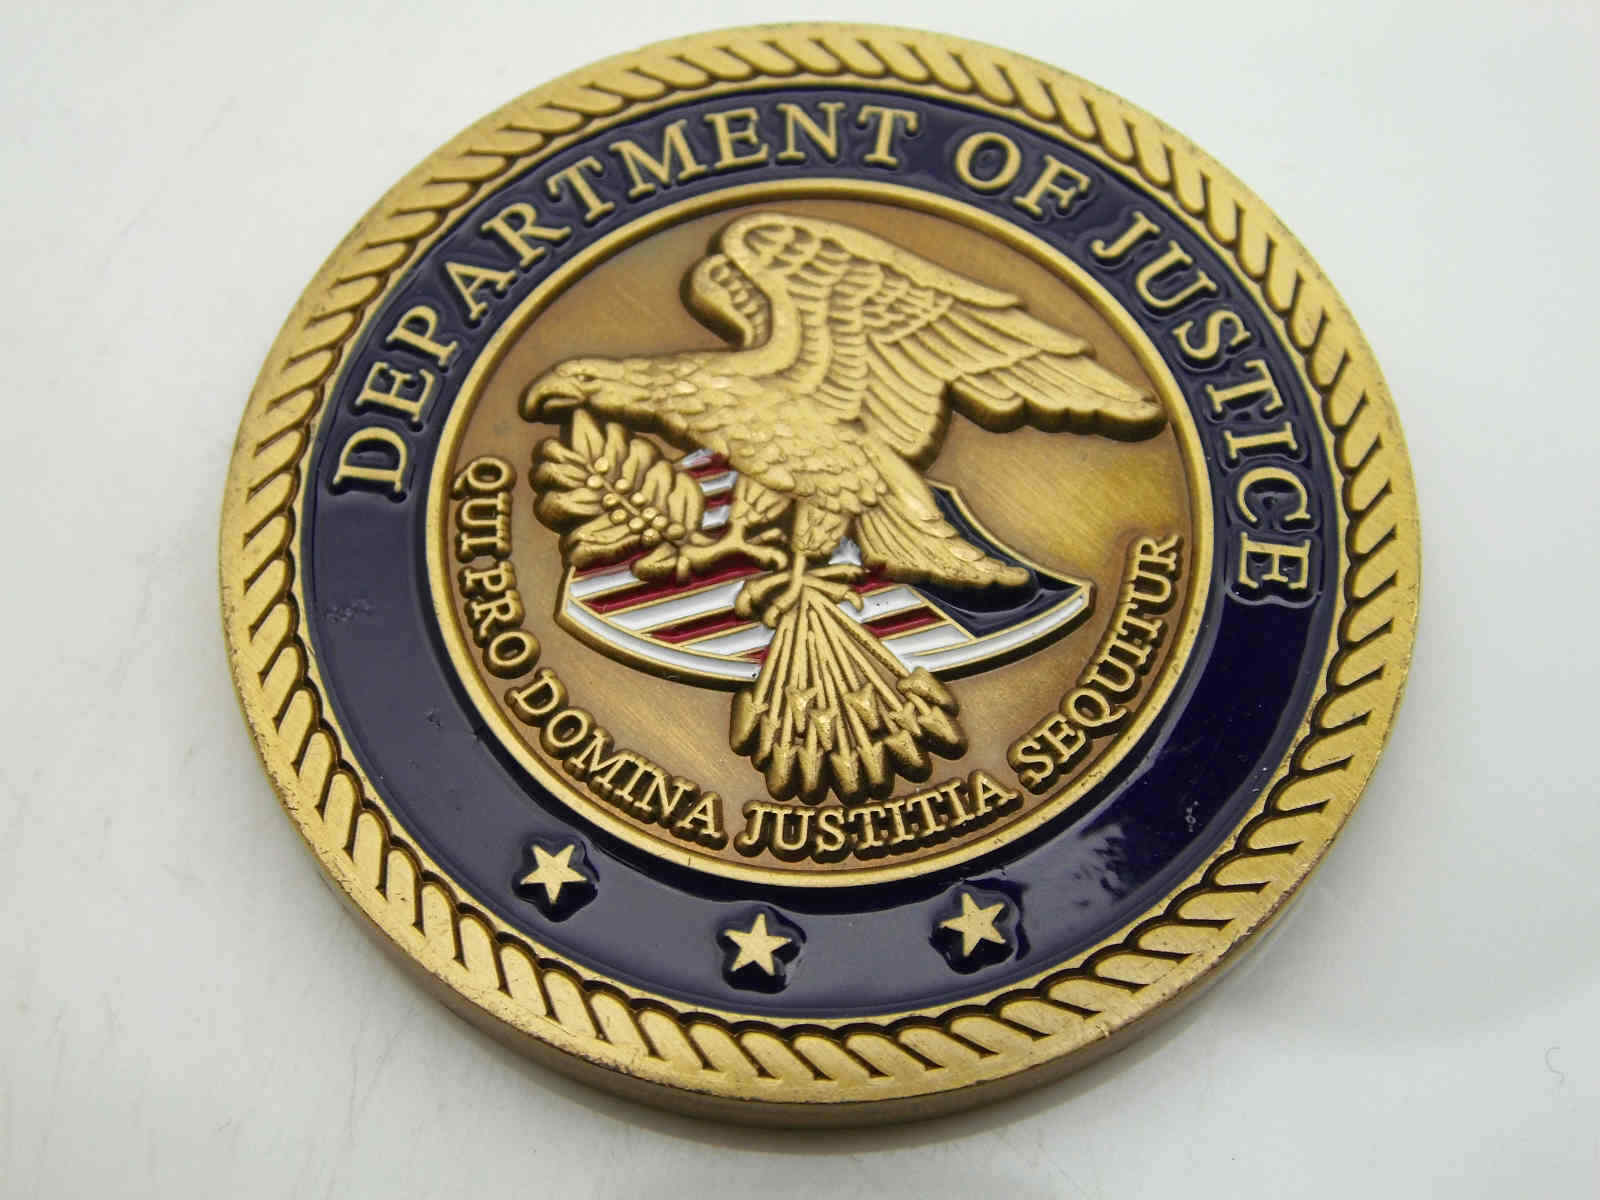 U.S. DEPARTMENT OF JUSTICE ECS ENVIRONMENTAL CRIMES SECTION CHALLENGE COIN